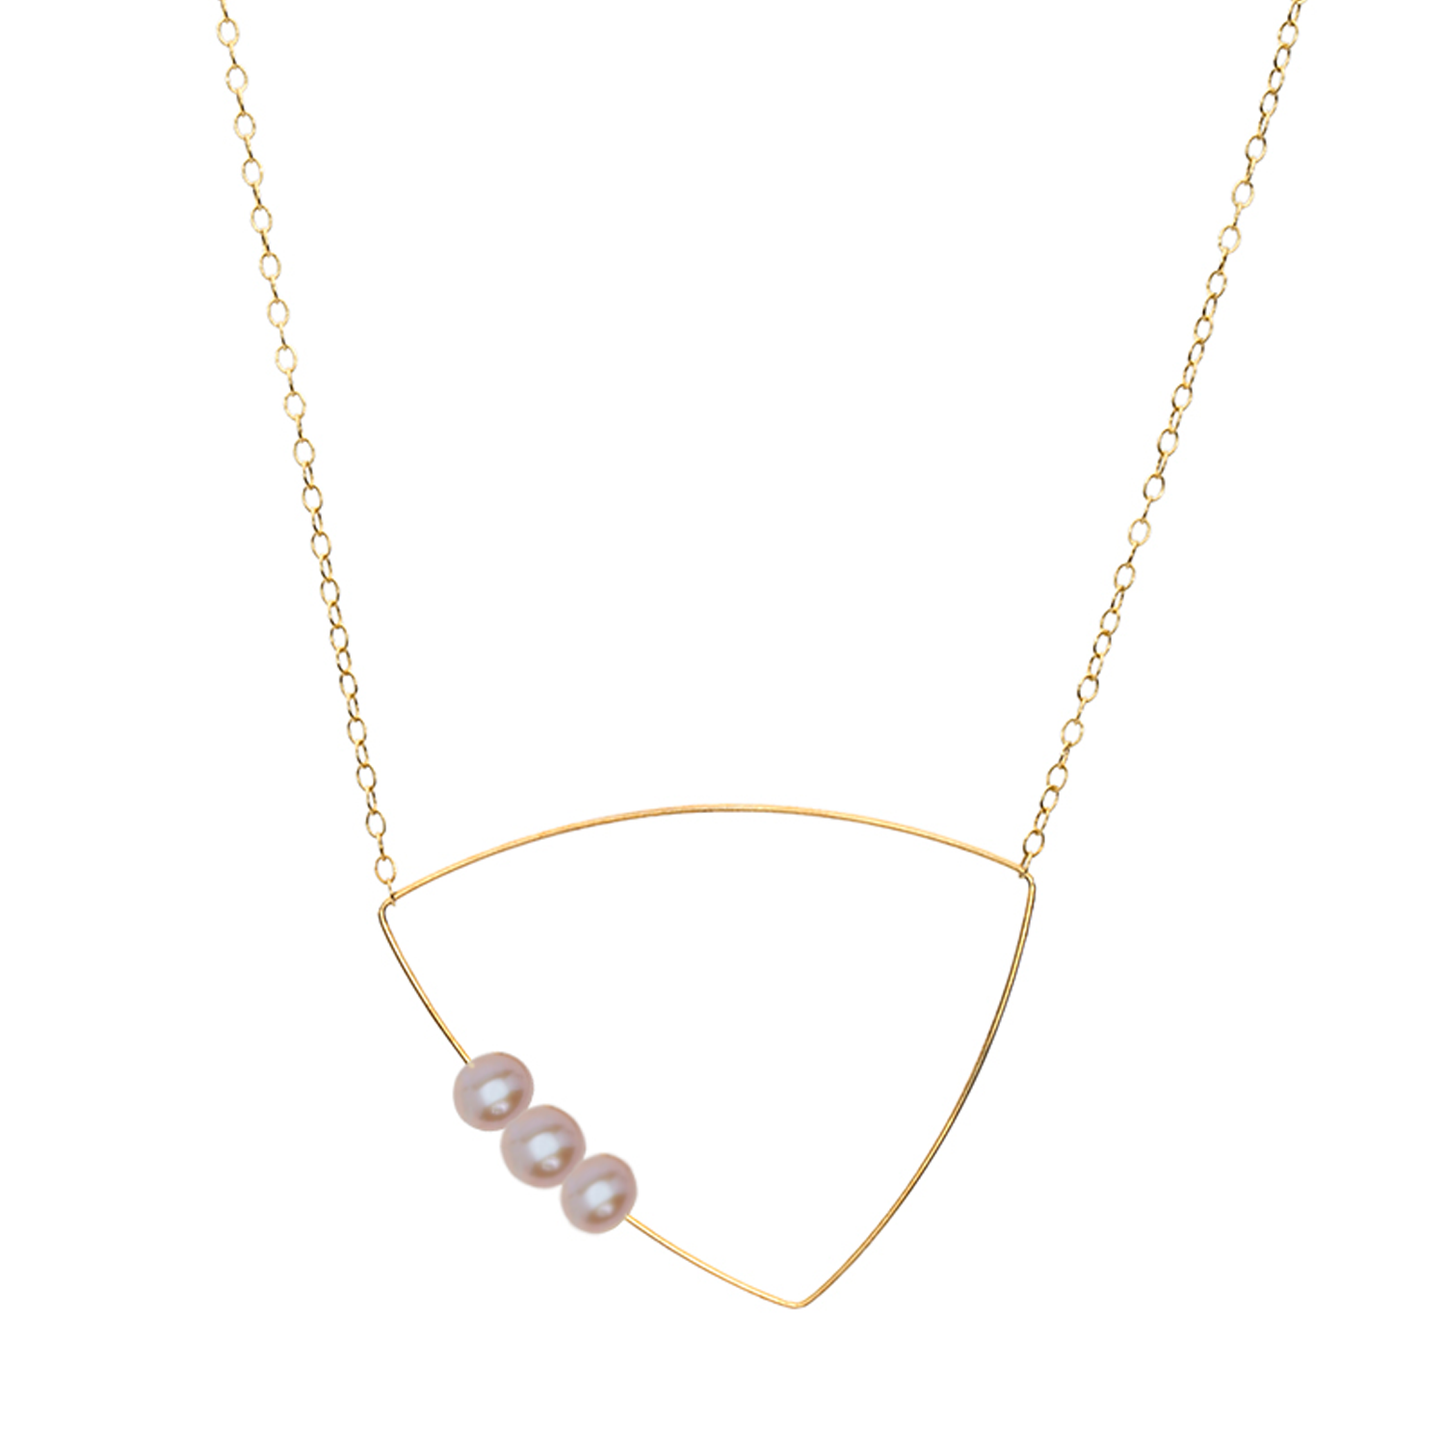 Triangle Pendant Necklace with Round Freshwater Pearls